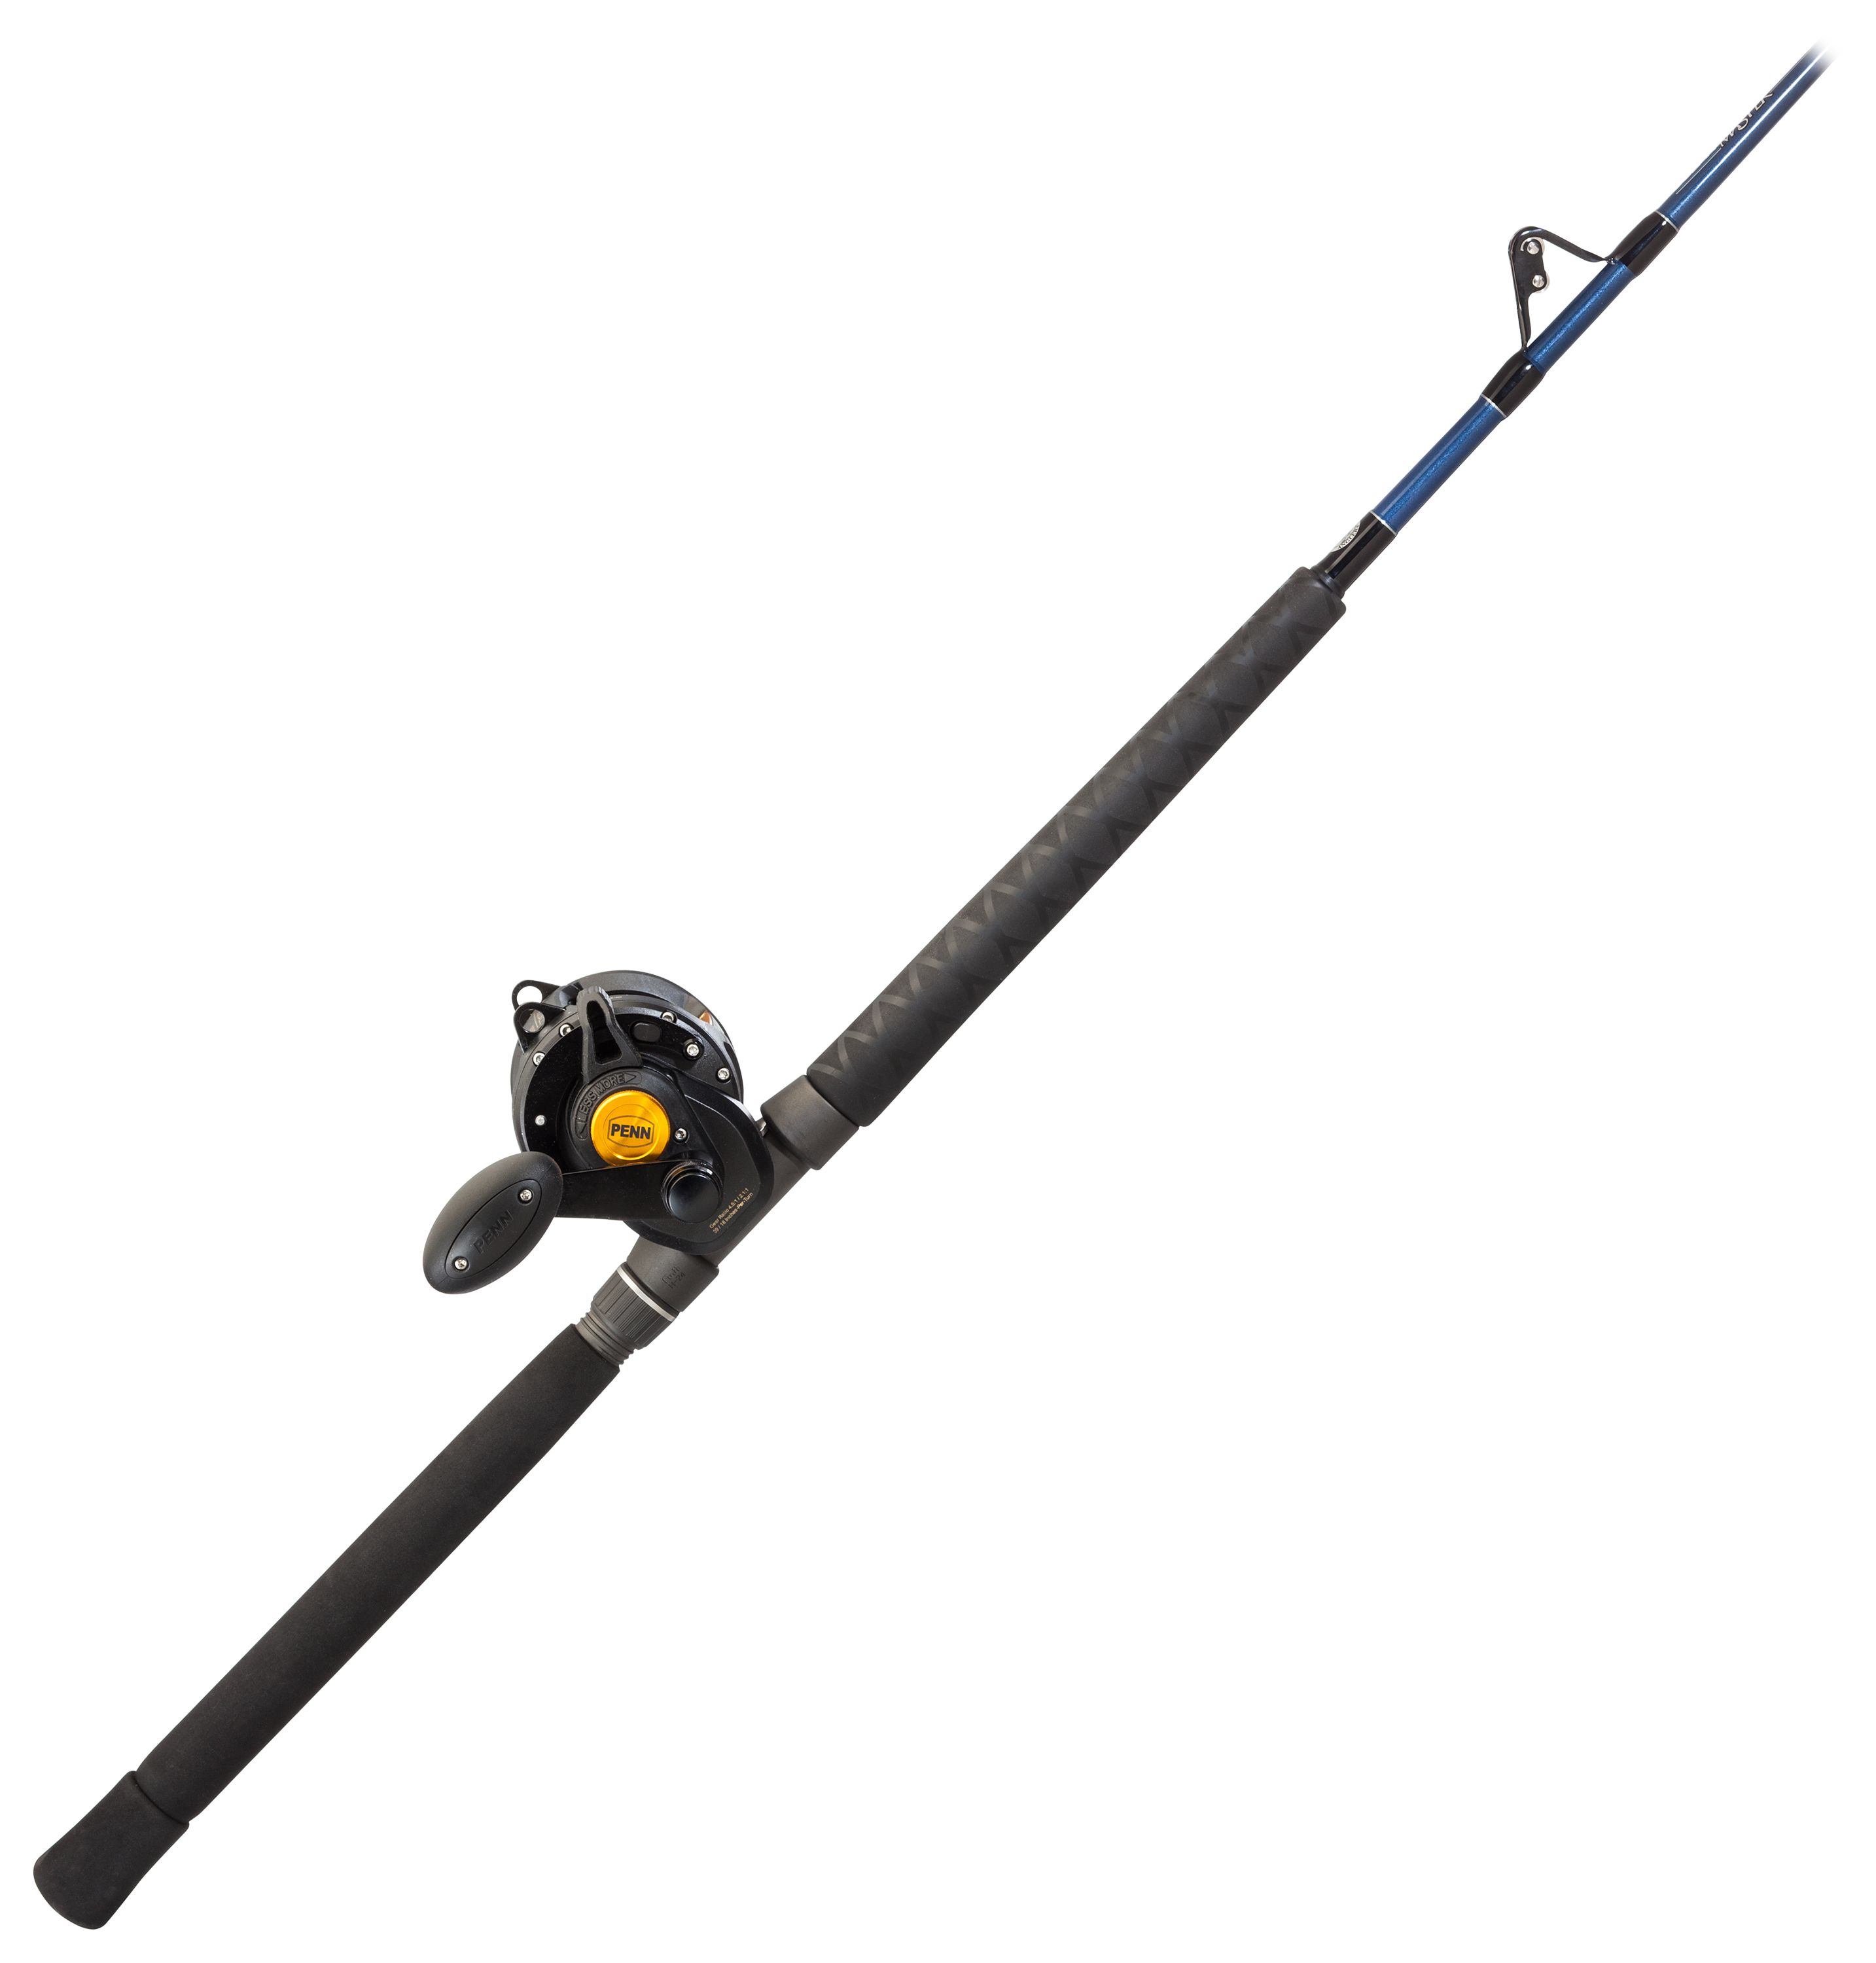 PENN Squall Two-speed Lever Drag Offshore Angler Ocean Master OMSU Stand-Up Rod and Reel Combo - SQL16VS OMSU-2C